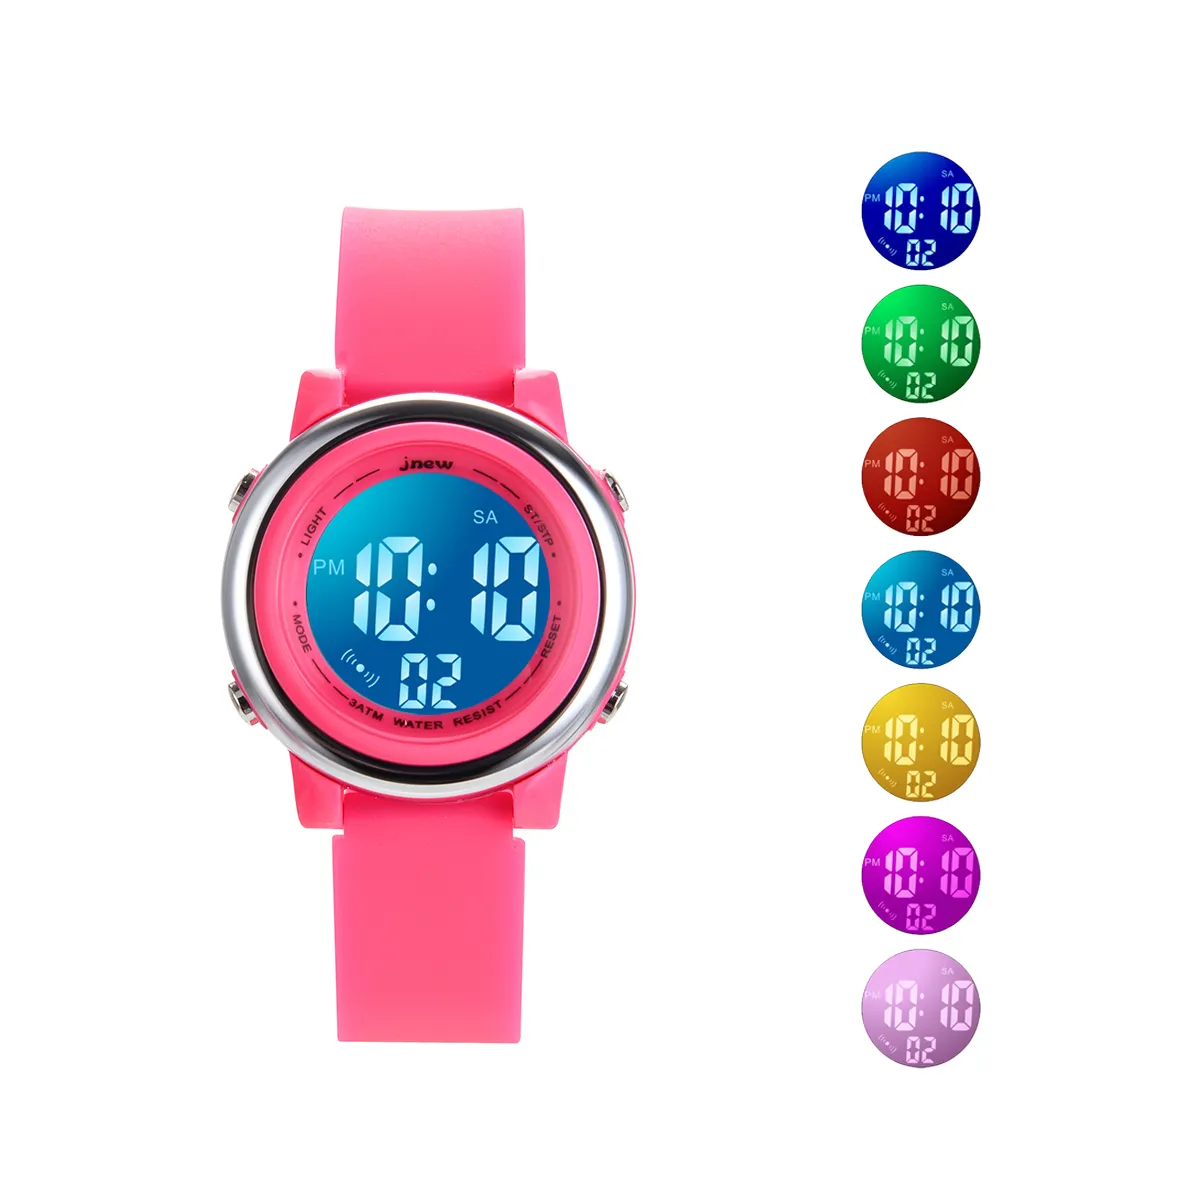 Silicone Rubber Wrist Pop Watch Boys Girls Kids Gift Boys And Girls 8 Colors Choose Unisex For kids Watch